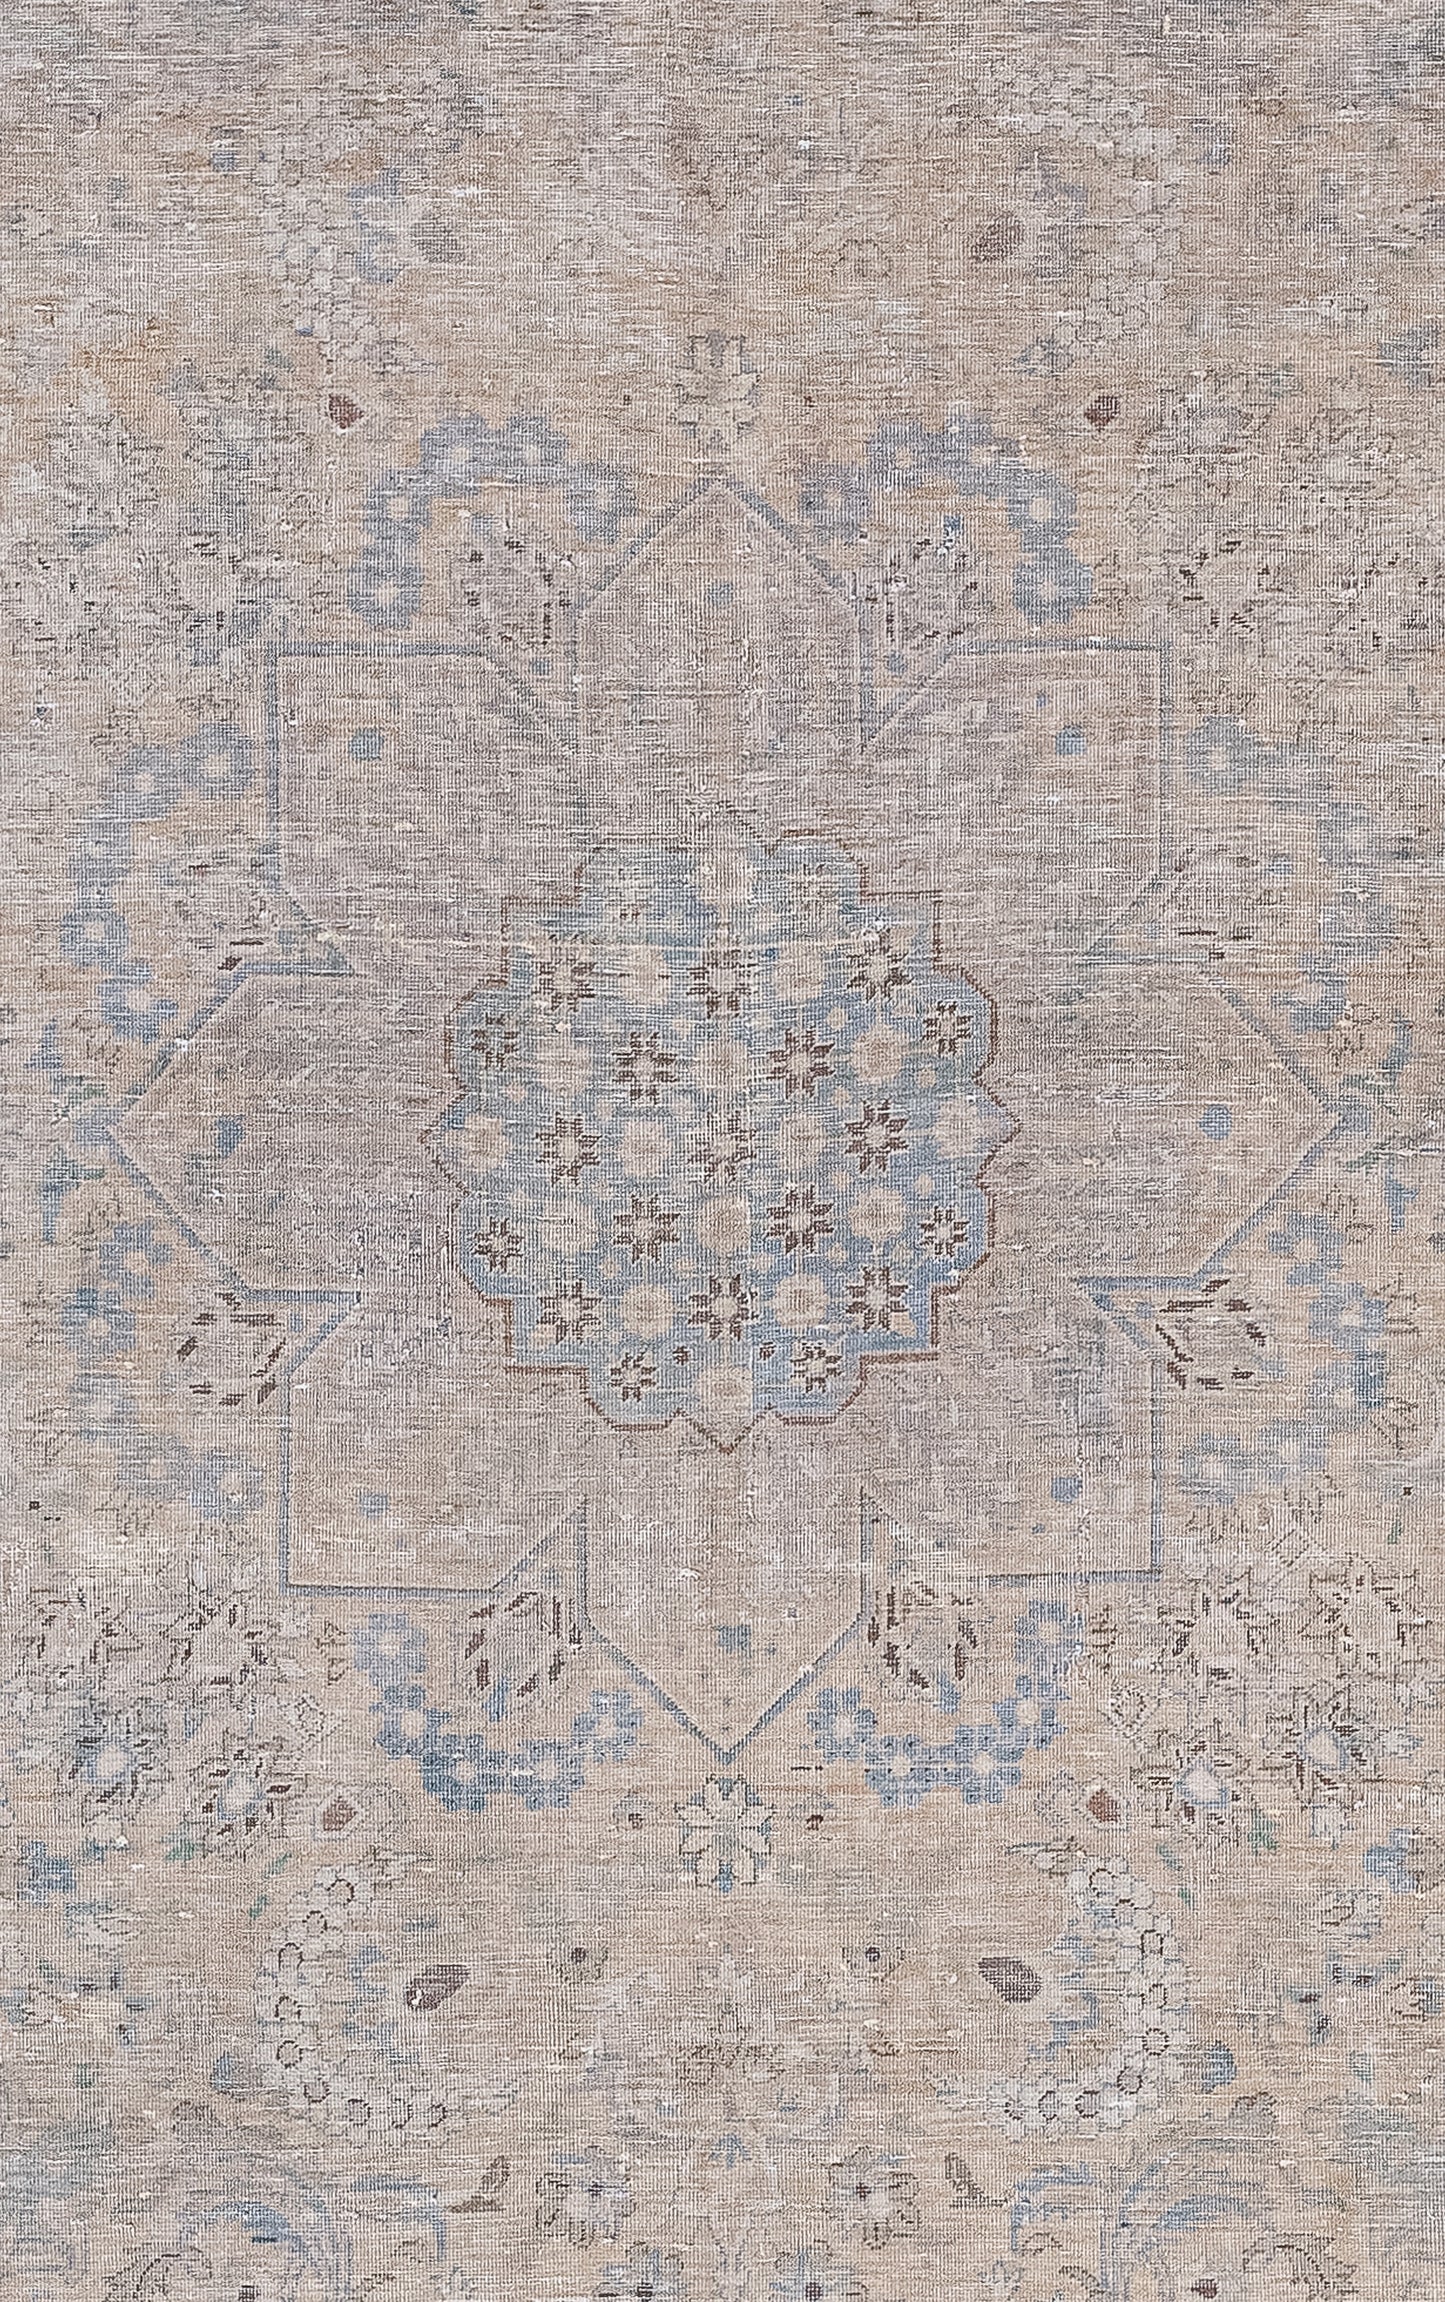 The center of the rug features a large mandala with a nested one filled with tiny flowers at the top.